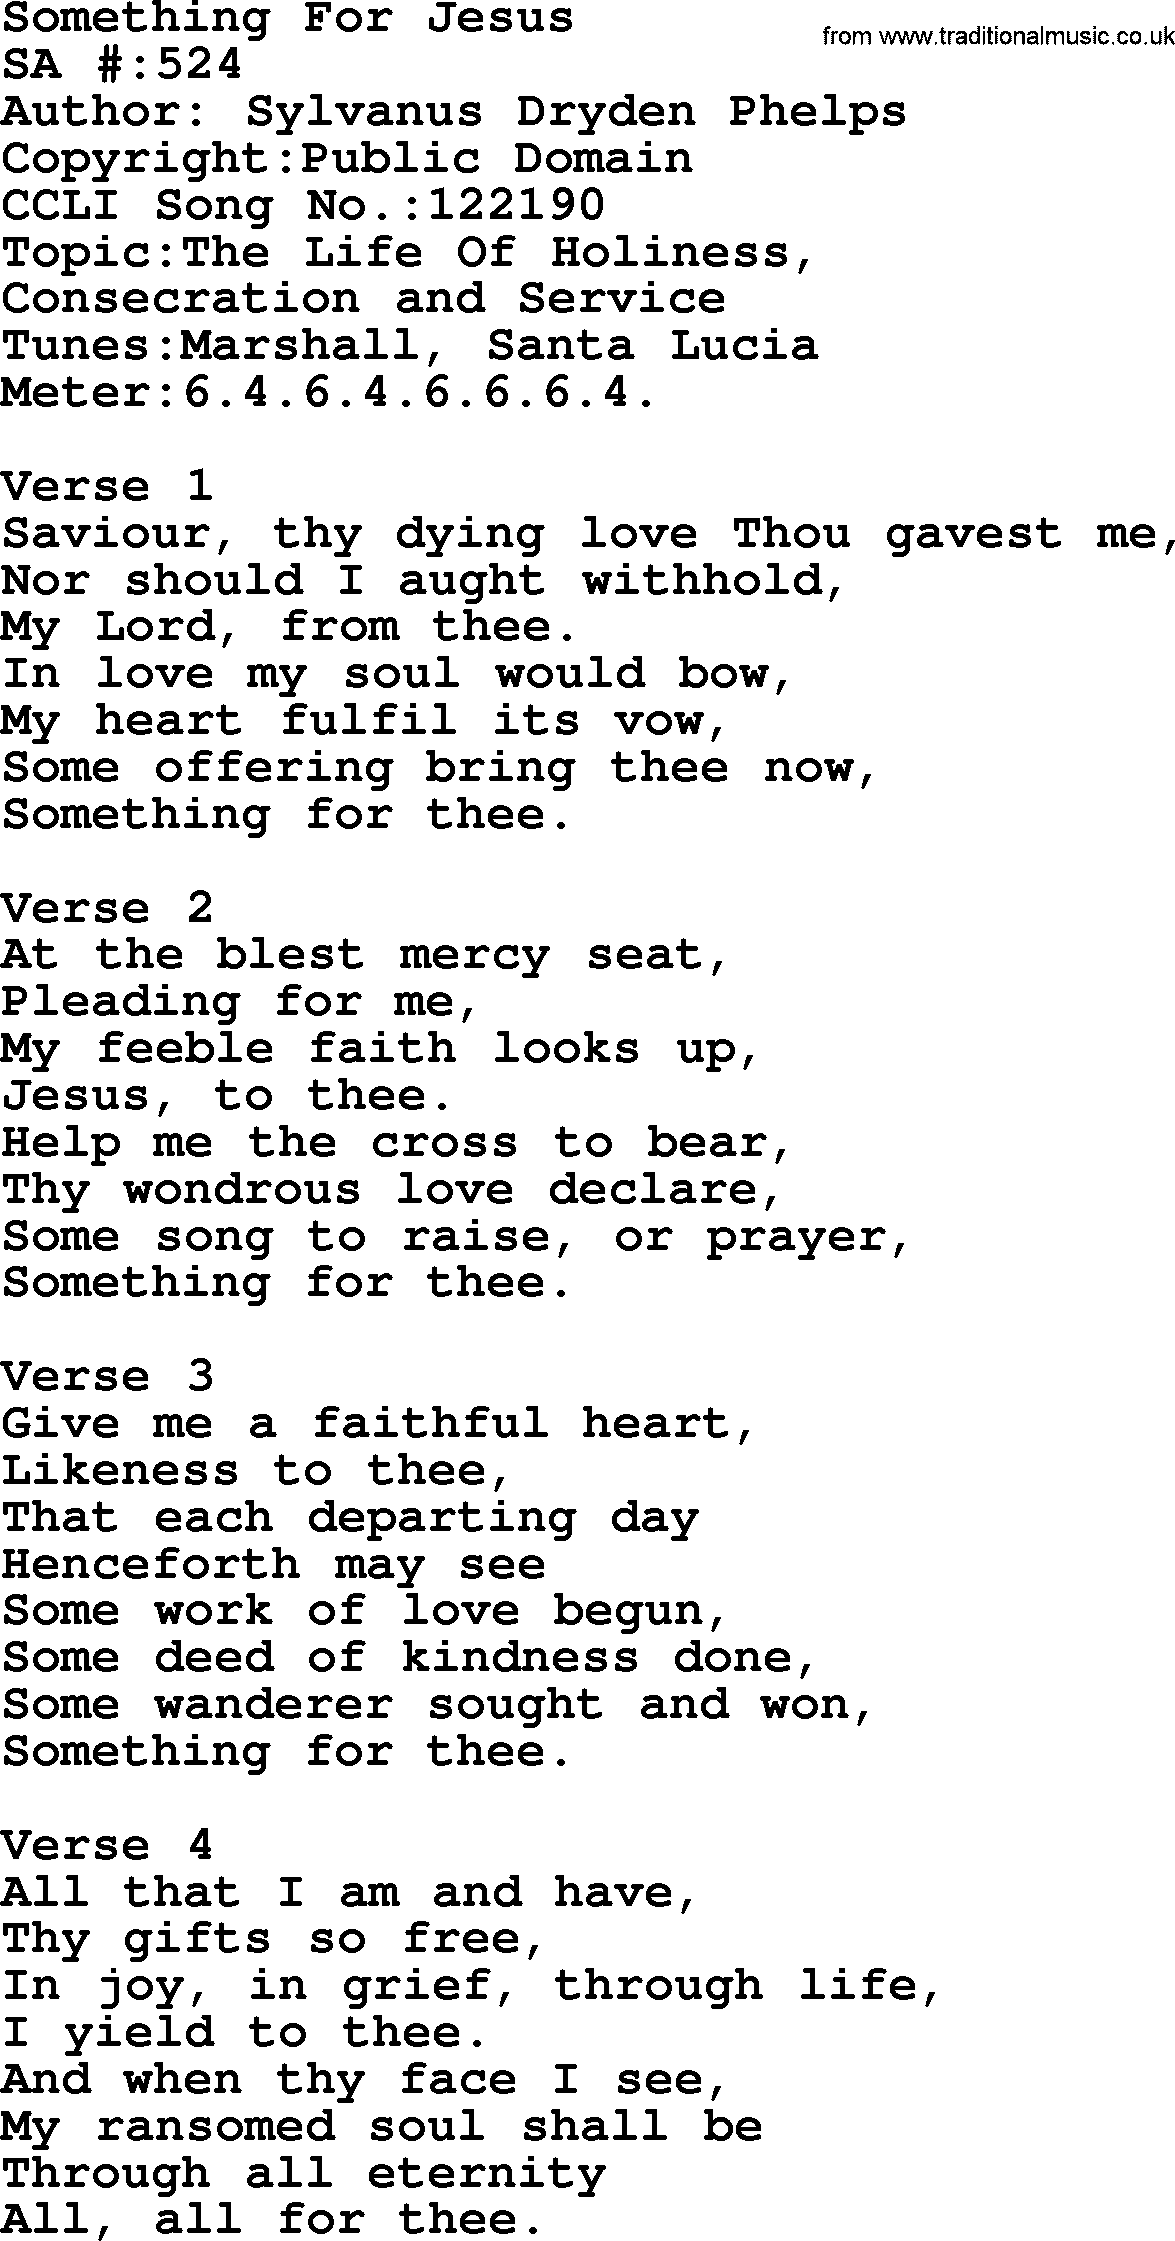 Salvation Army Hymnal, title: Something For Jesus, with lyrics and PDF,